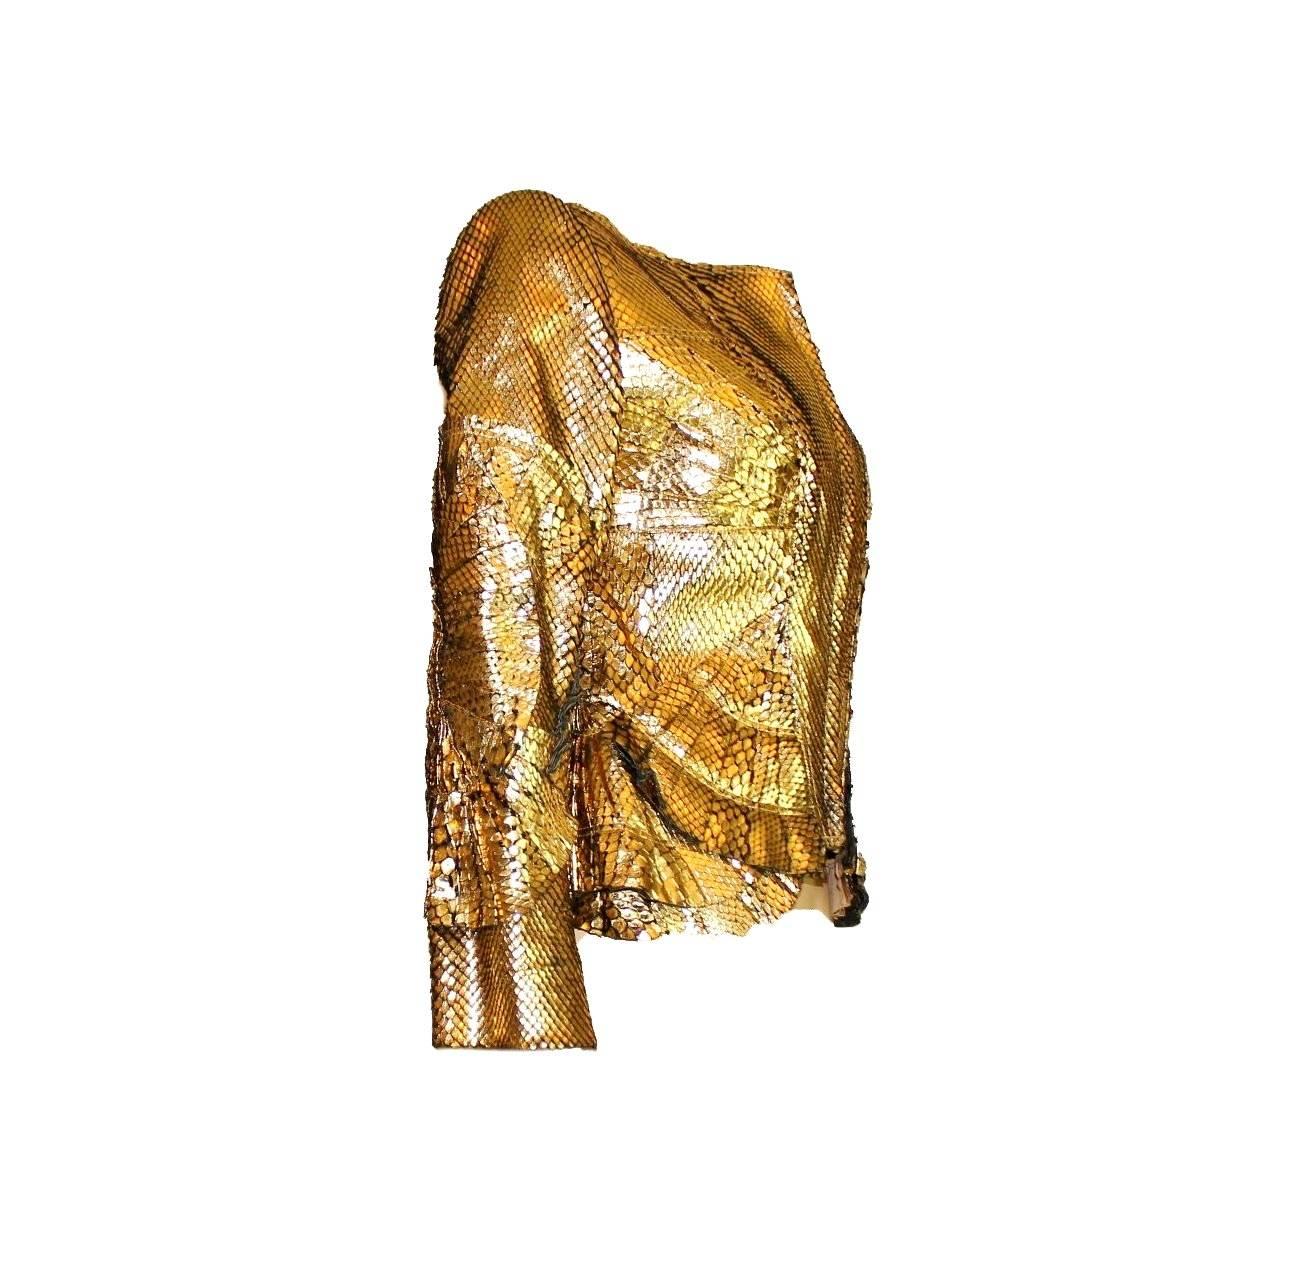 Insane Gucci Golden Skin Fan Jacket From Tom Ford's Last Summer Collection For Gucci In 2004

A True Collector's Piece Shown On Runway Show S/S 2004 As Well As In The Gucci Ad Campaign. One Of Only 30 Pieces That Have Been Made Worldwide, offered to